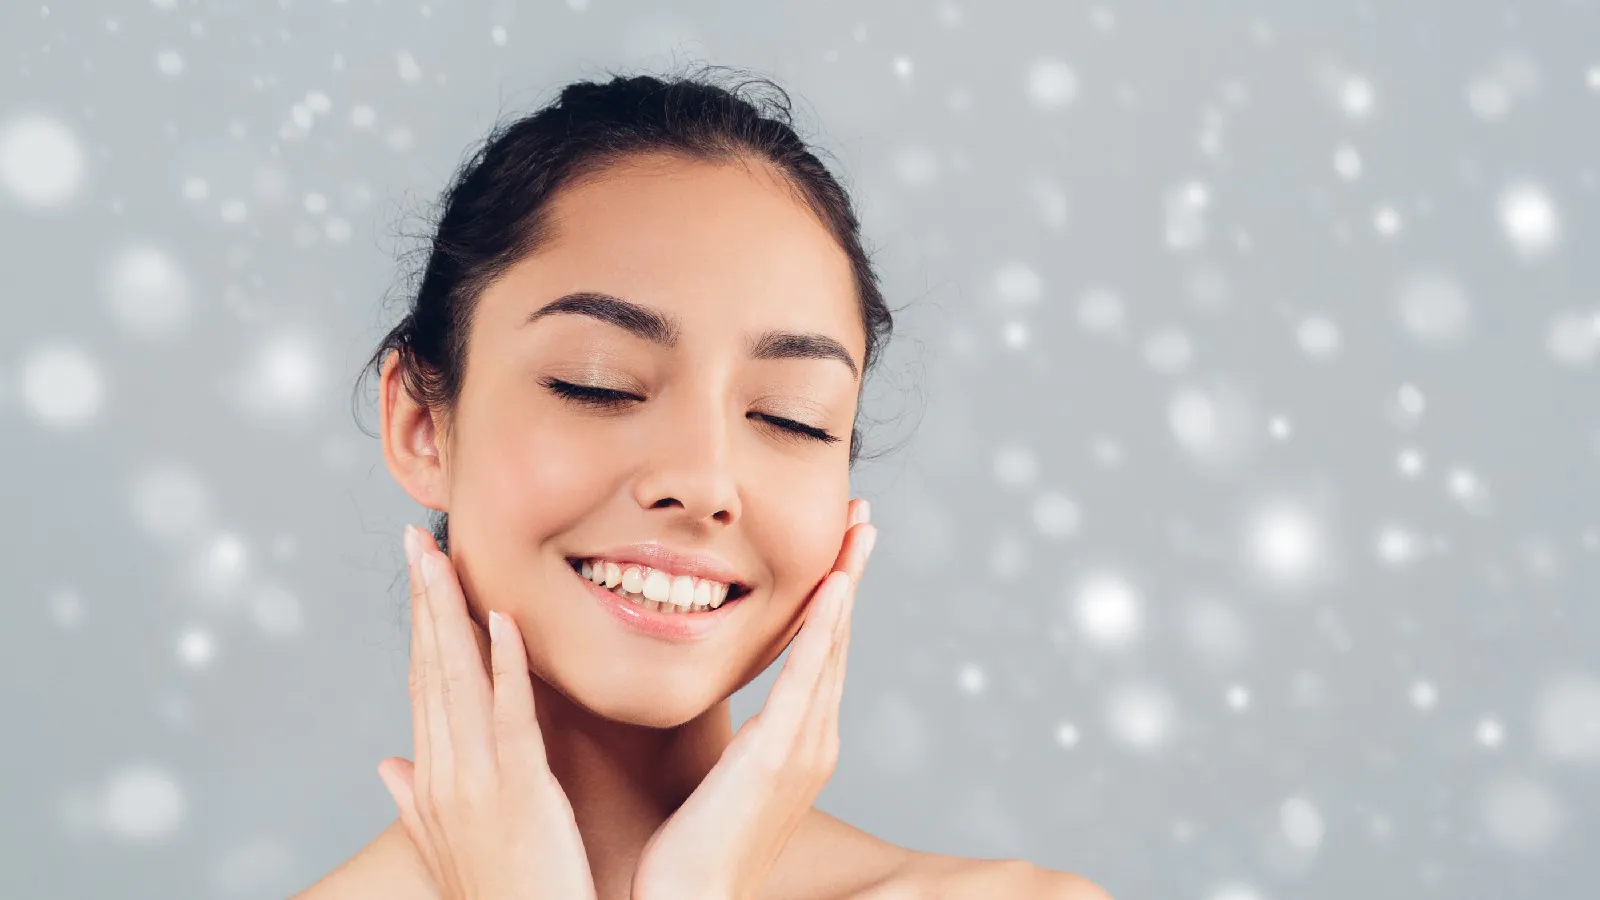 What You Should Avoid In Winter Skincare Routine?